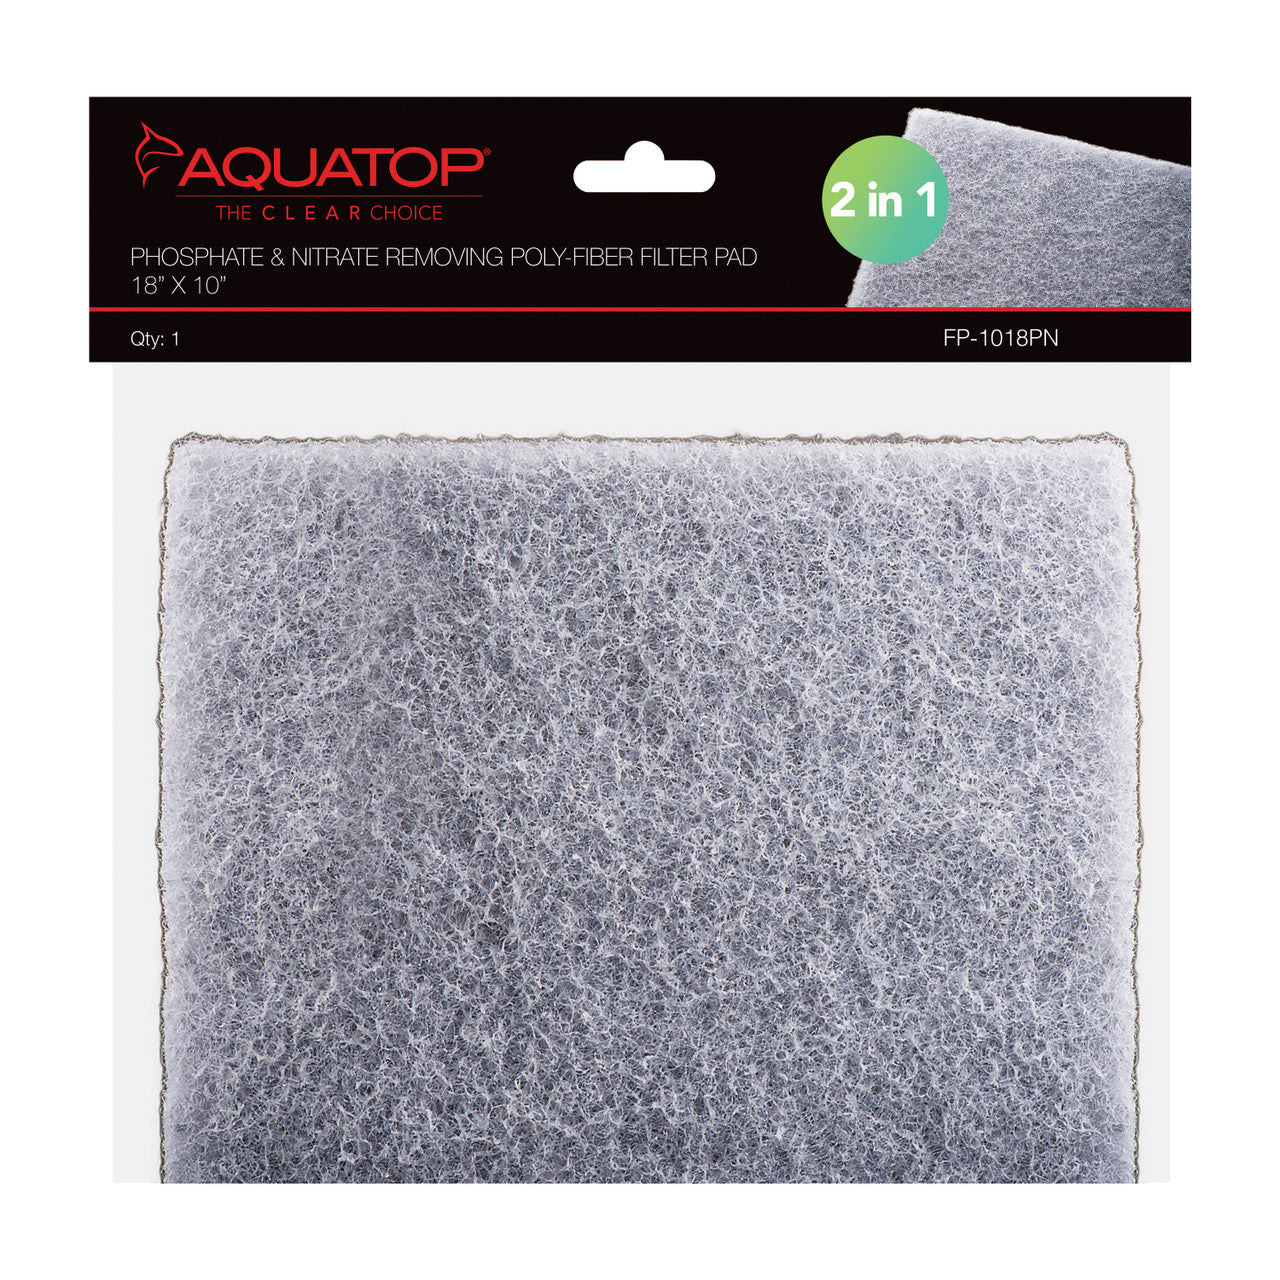 Aquatop Phosphate & Nitrate Removing Poly-fiber Filter Pad 18x10, 1pc